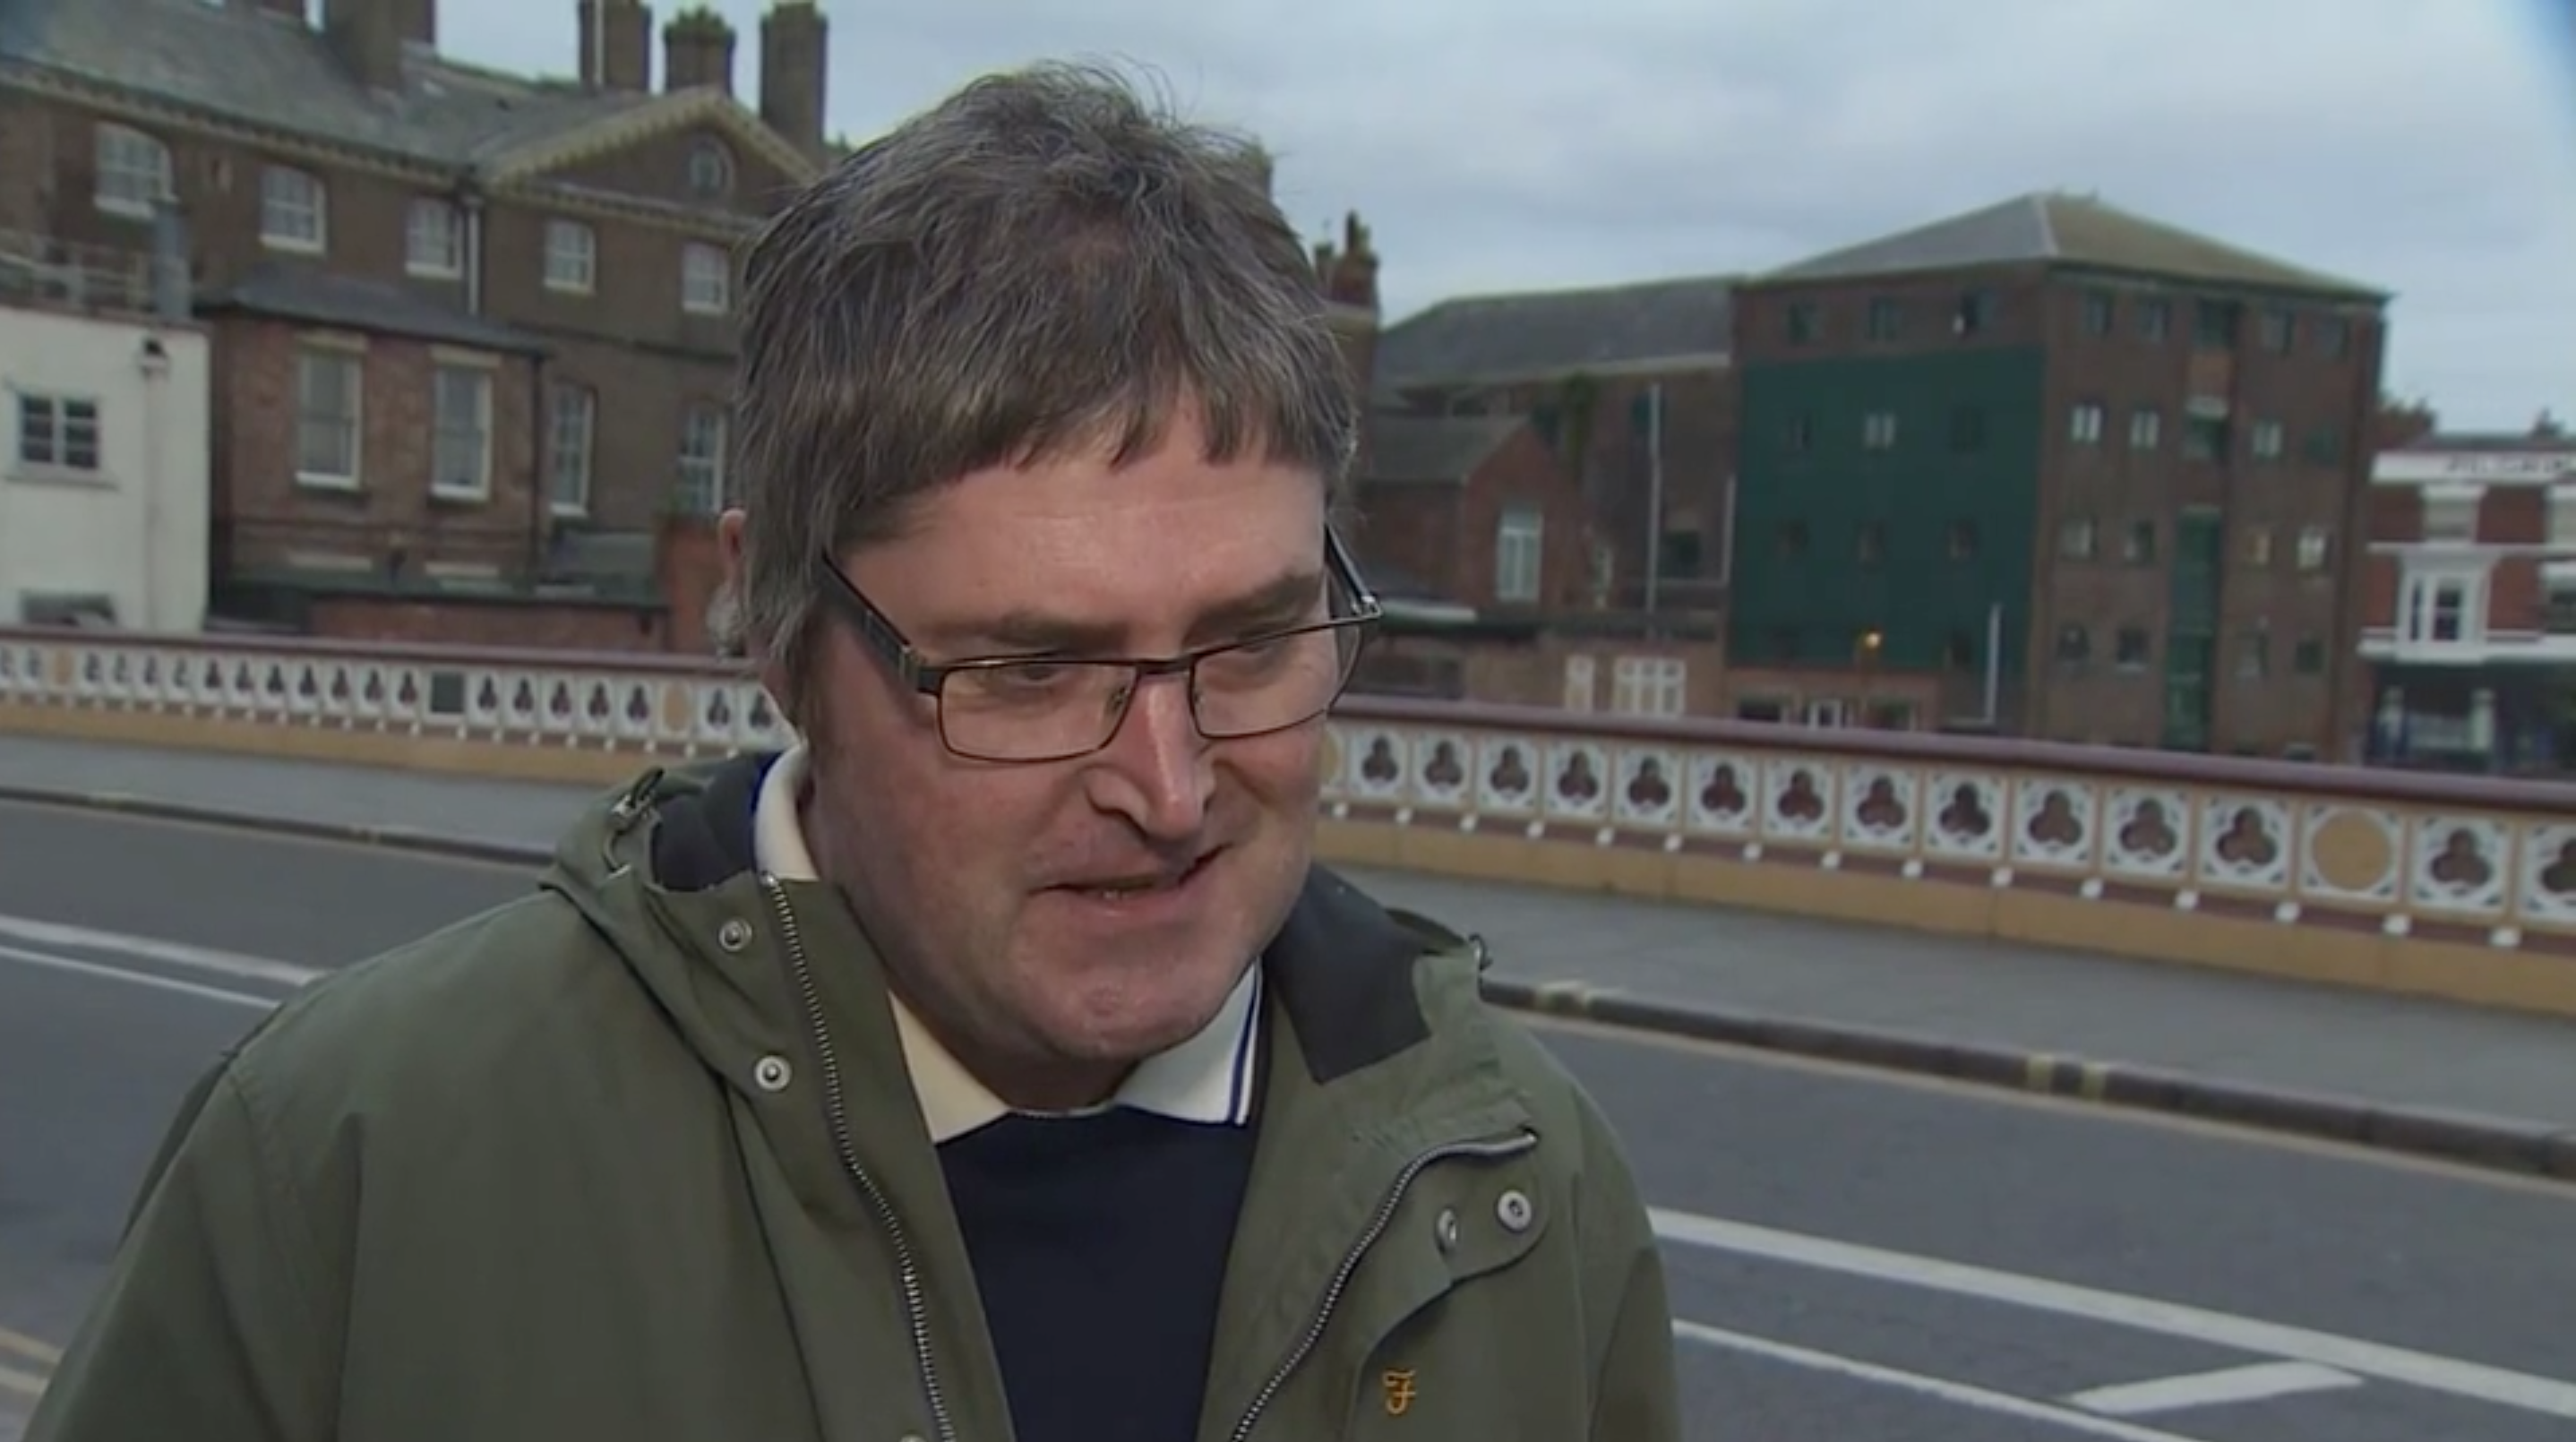 48-year-old Ian Epton says he'd rather Theresa May concentrated on "getting the job done."